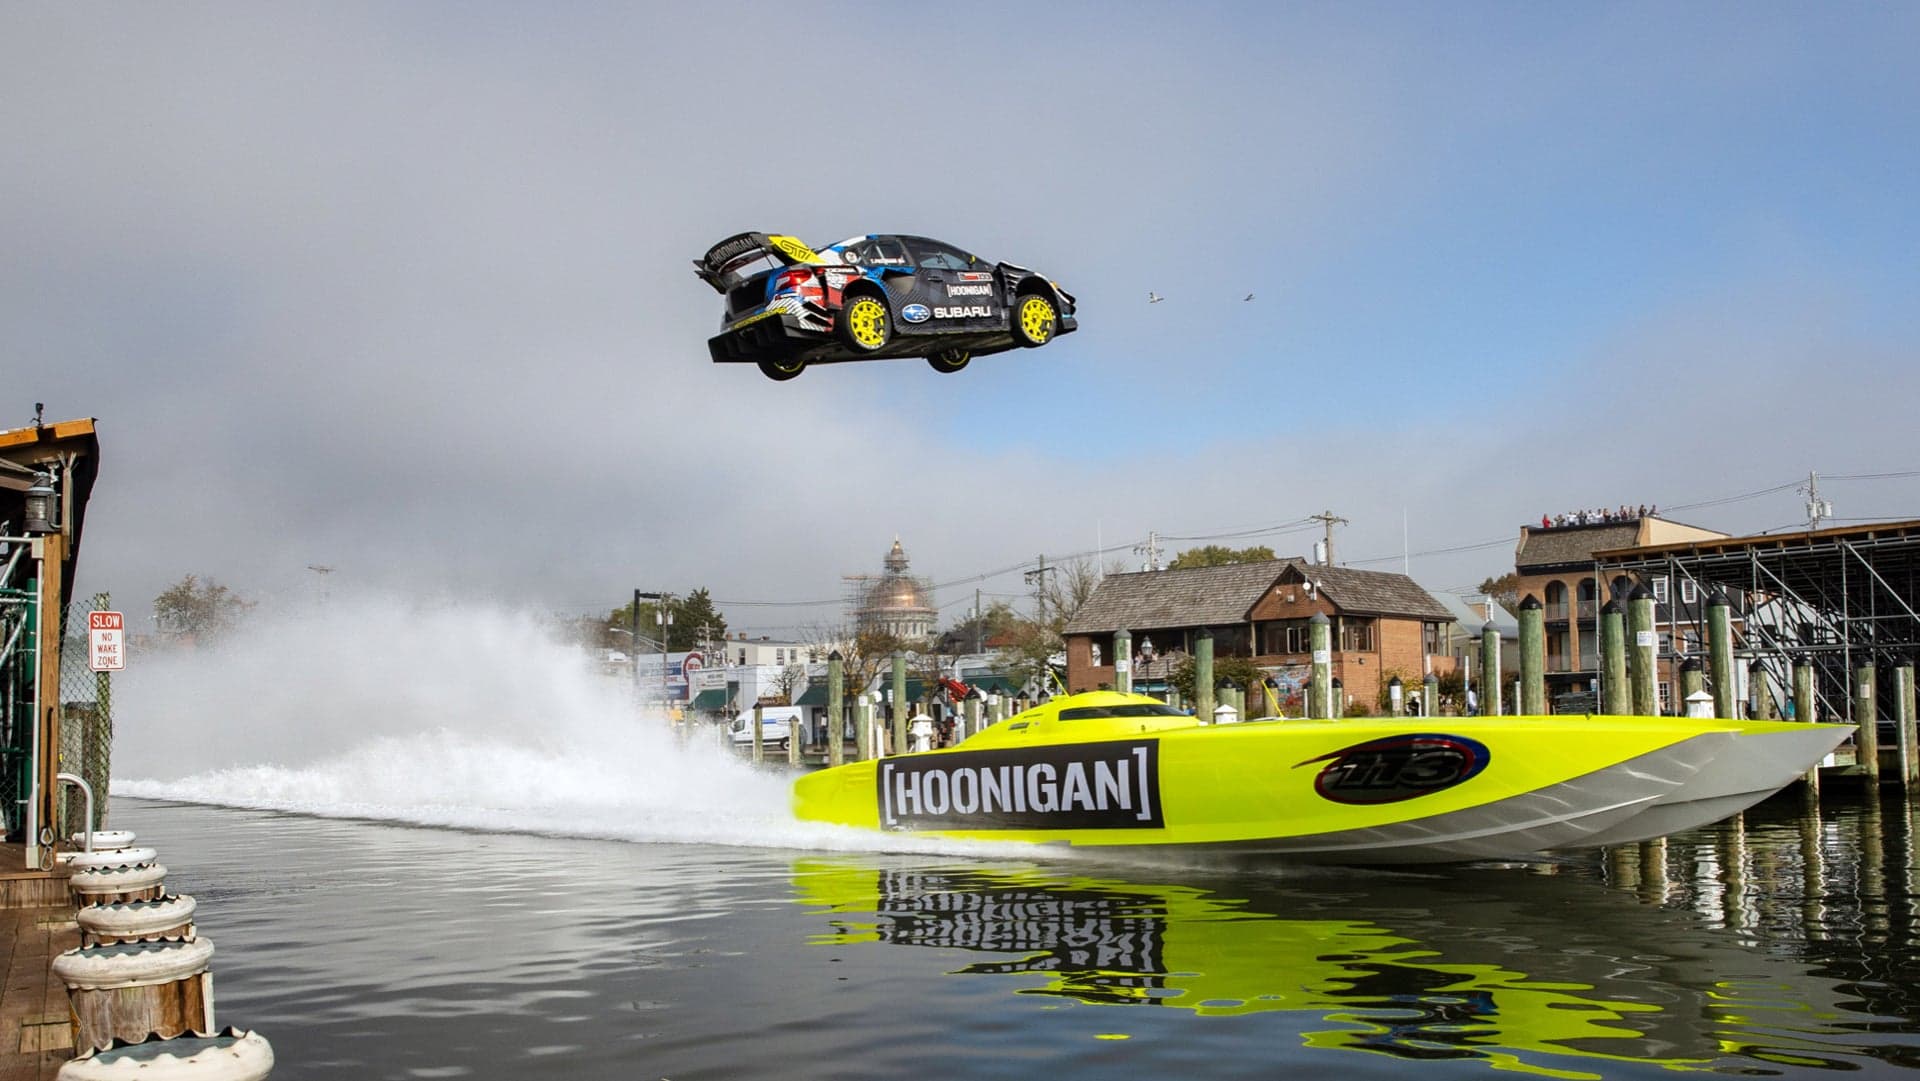 Gymkhana 11: Travis Pastrana Gets the Biggest Air Over His Hometown